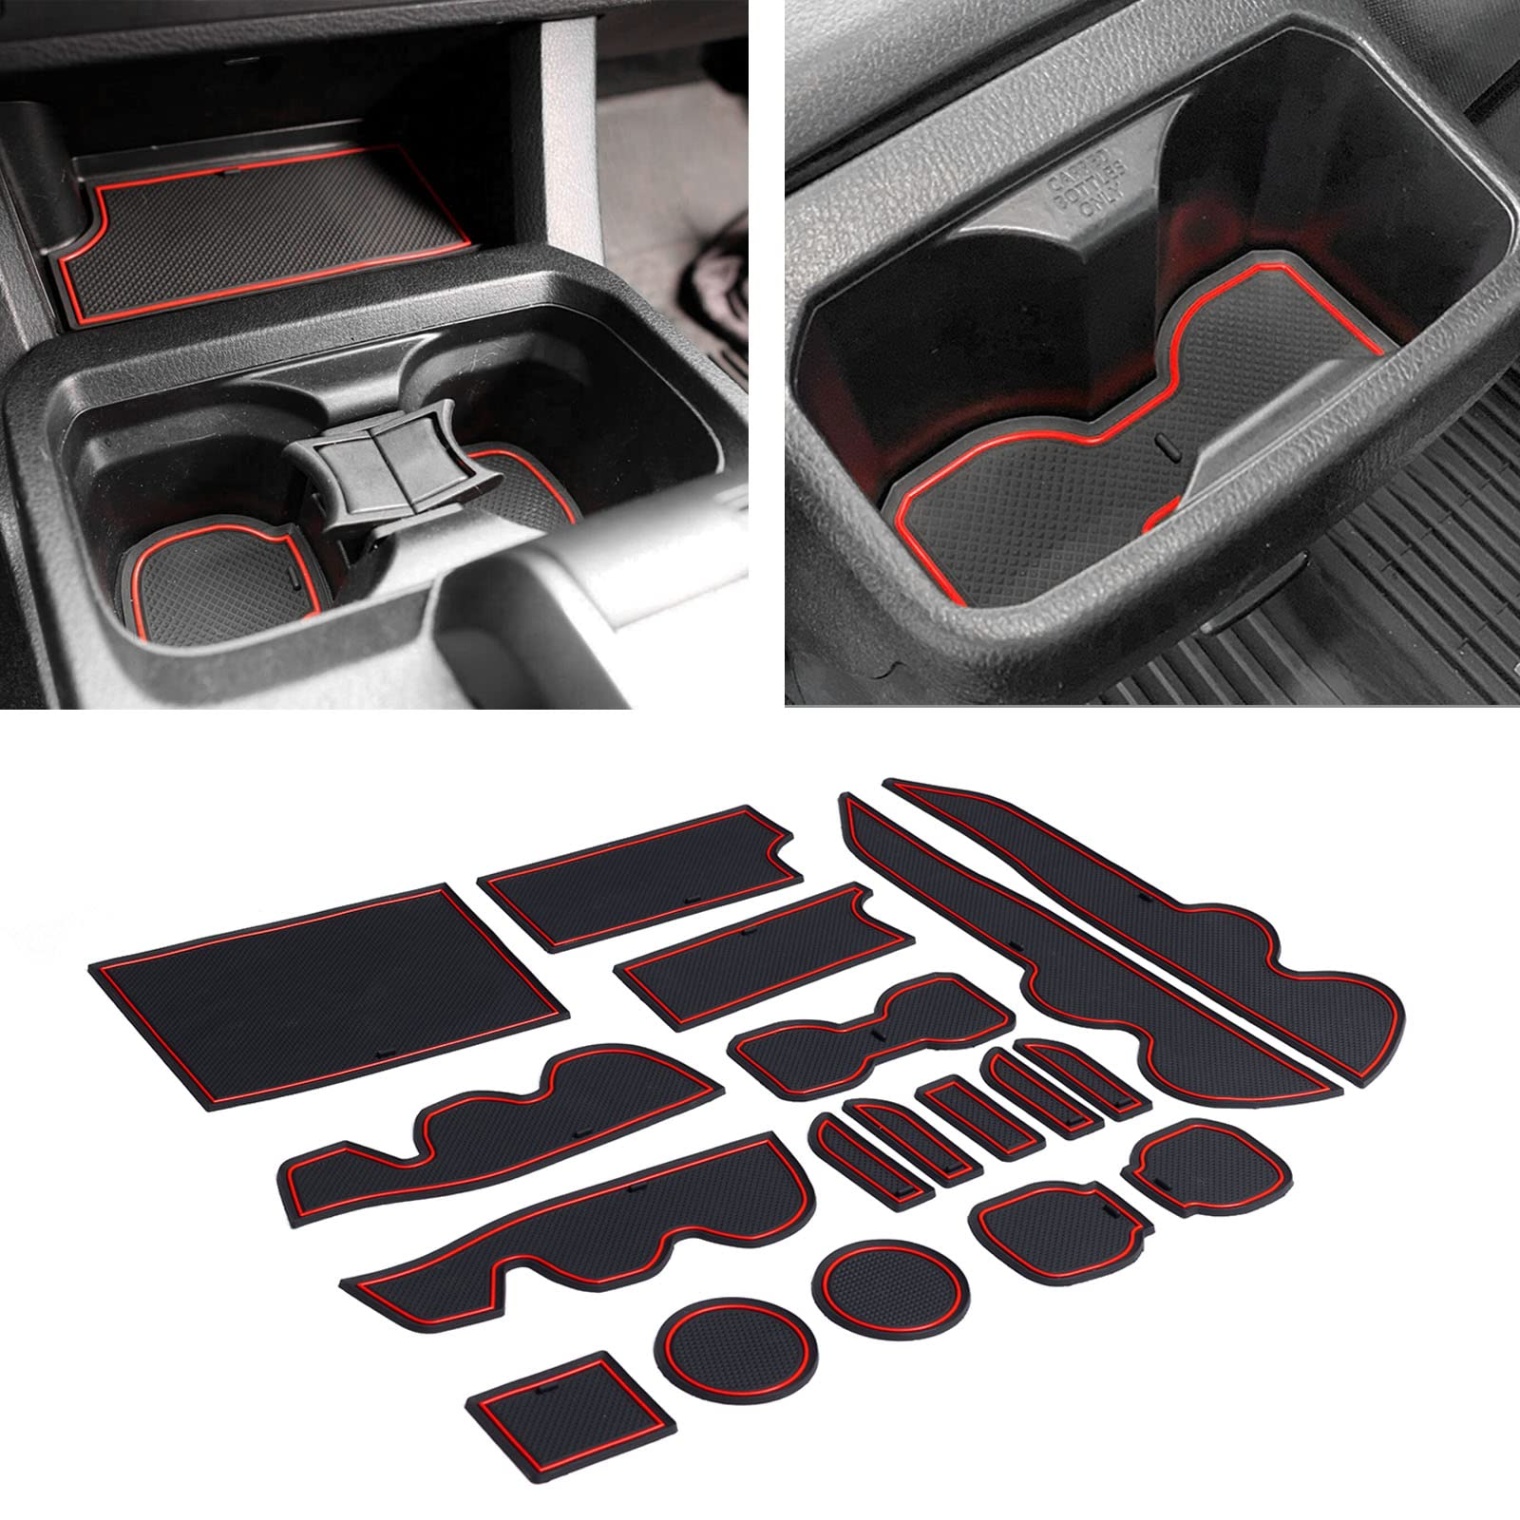 accessories toyota tacoma 2016 Bulan 3 JDMCAR Compatible with Toyota Tacoma Accessories - Premium Cup  Holder, Console, and Door Pocket Inserts Kit (Double Cab, Red Trim)